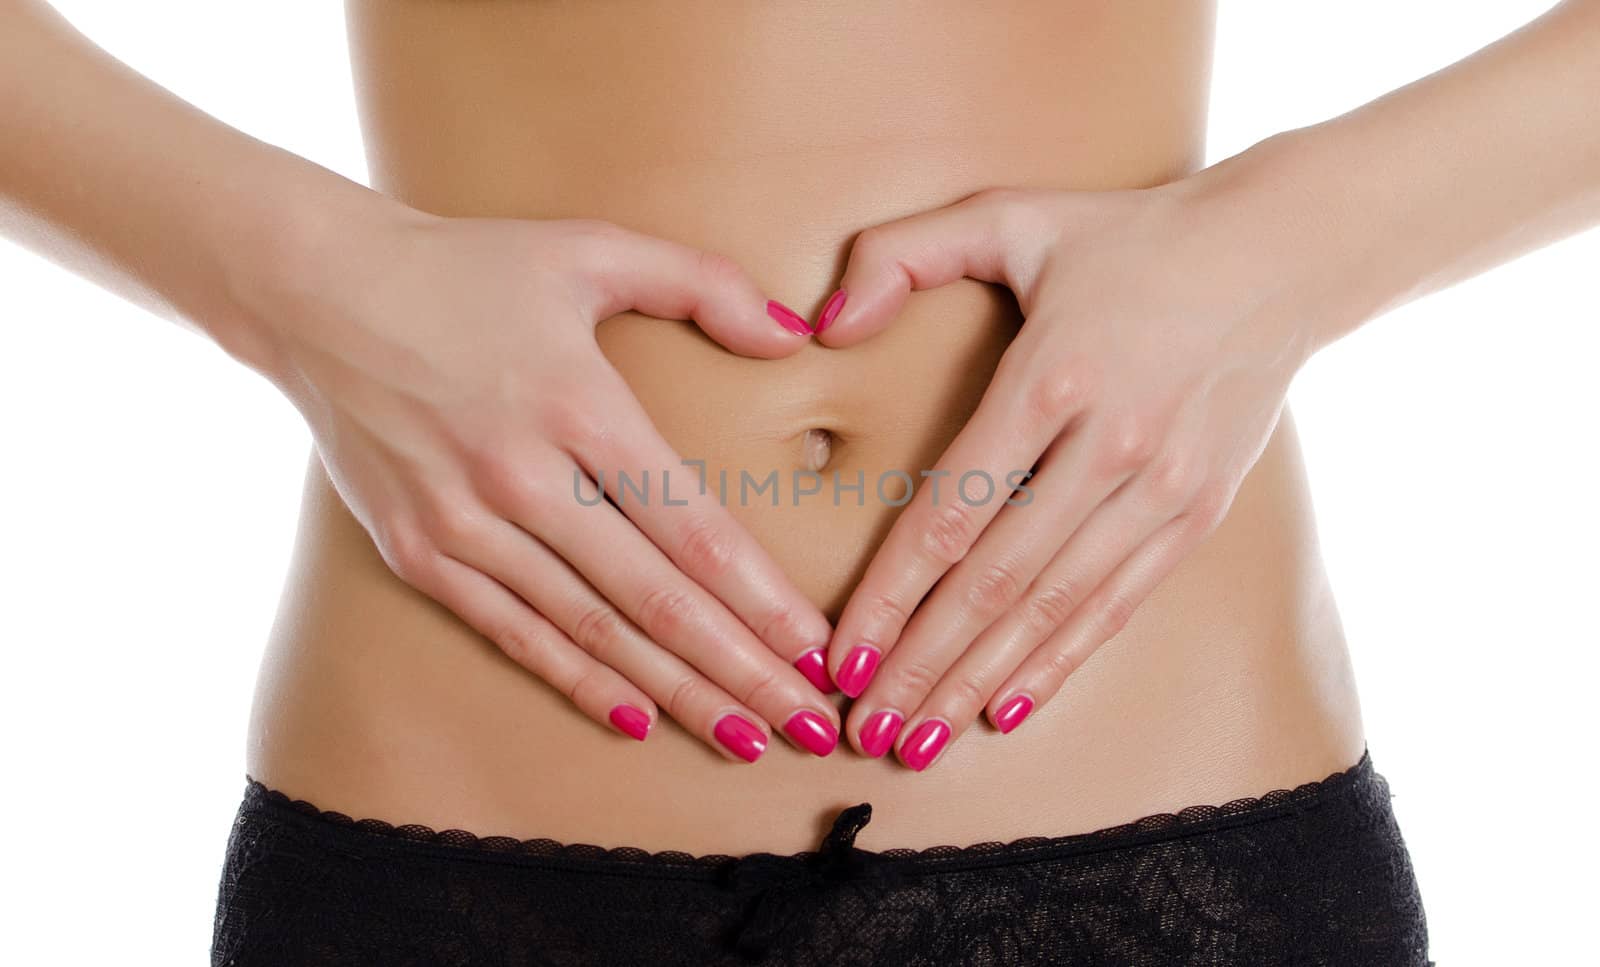 Female making heart shape with her hands on her belly. Isolated on white.